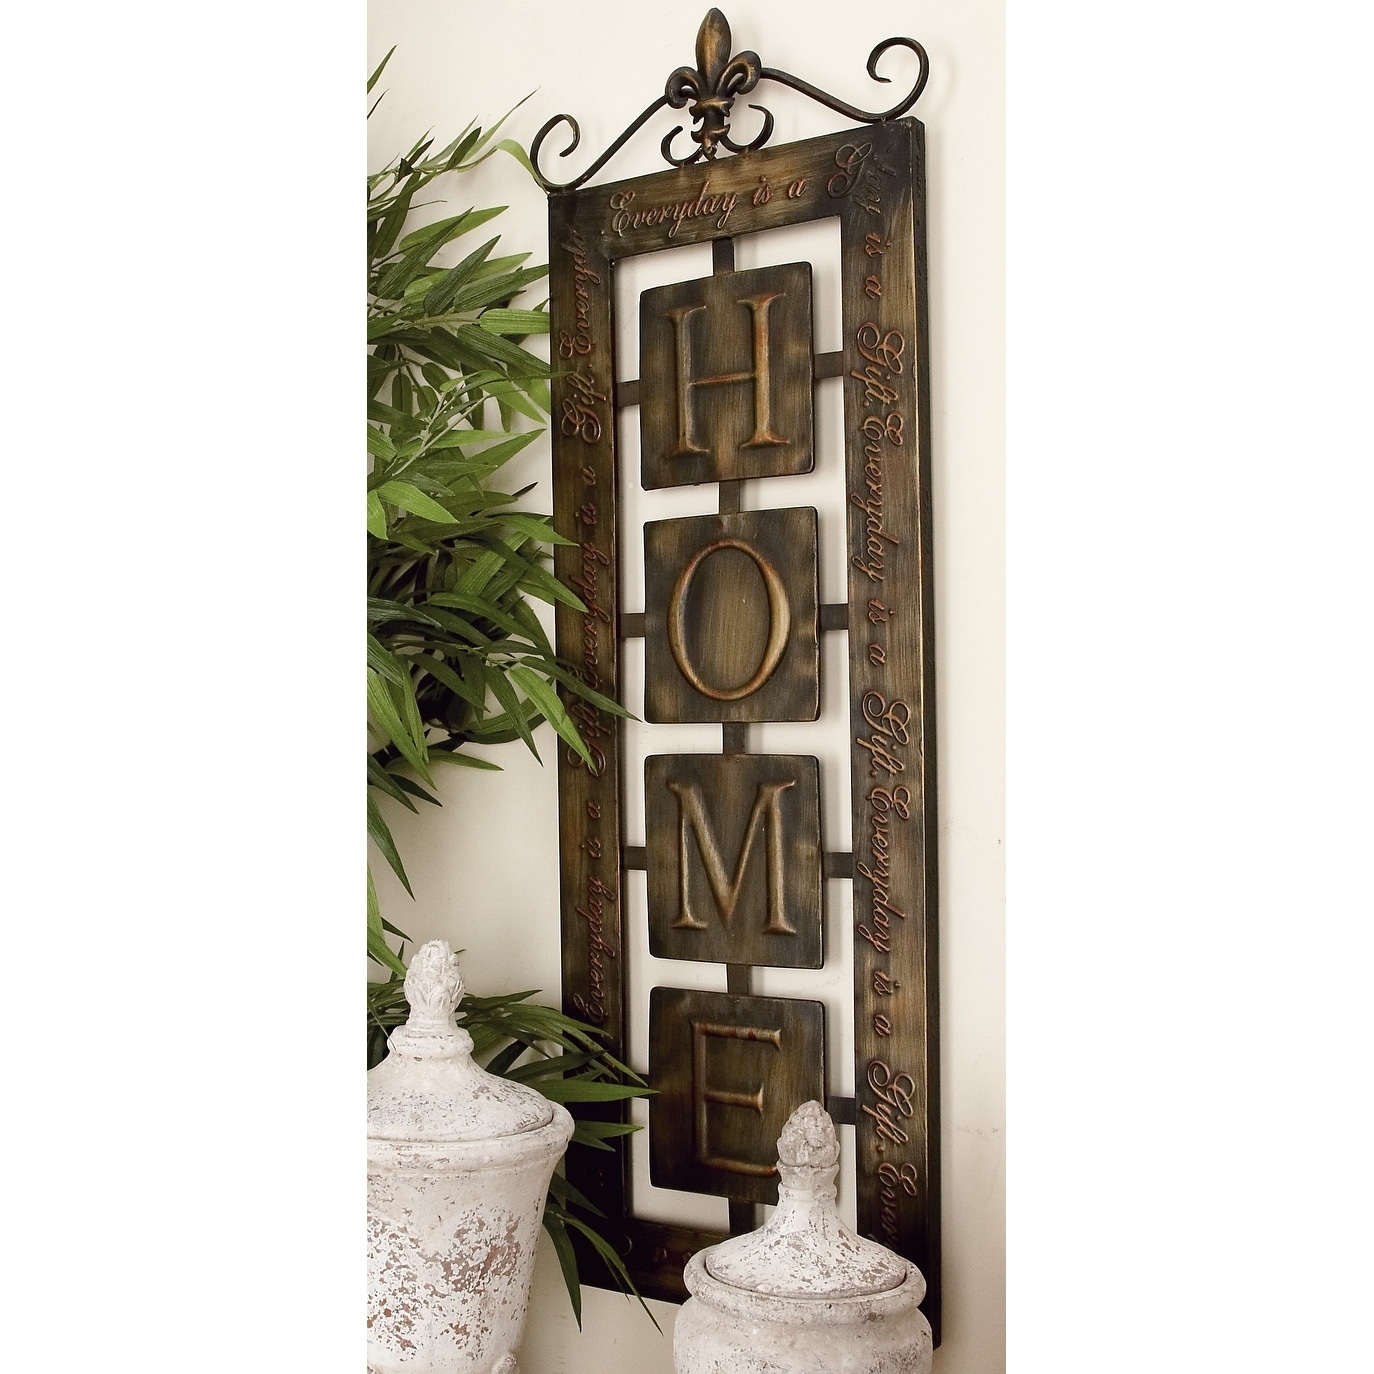 Home Metal Wall Plaque